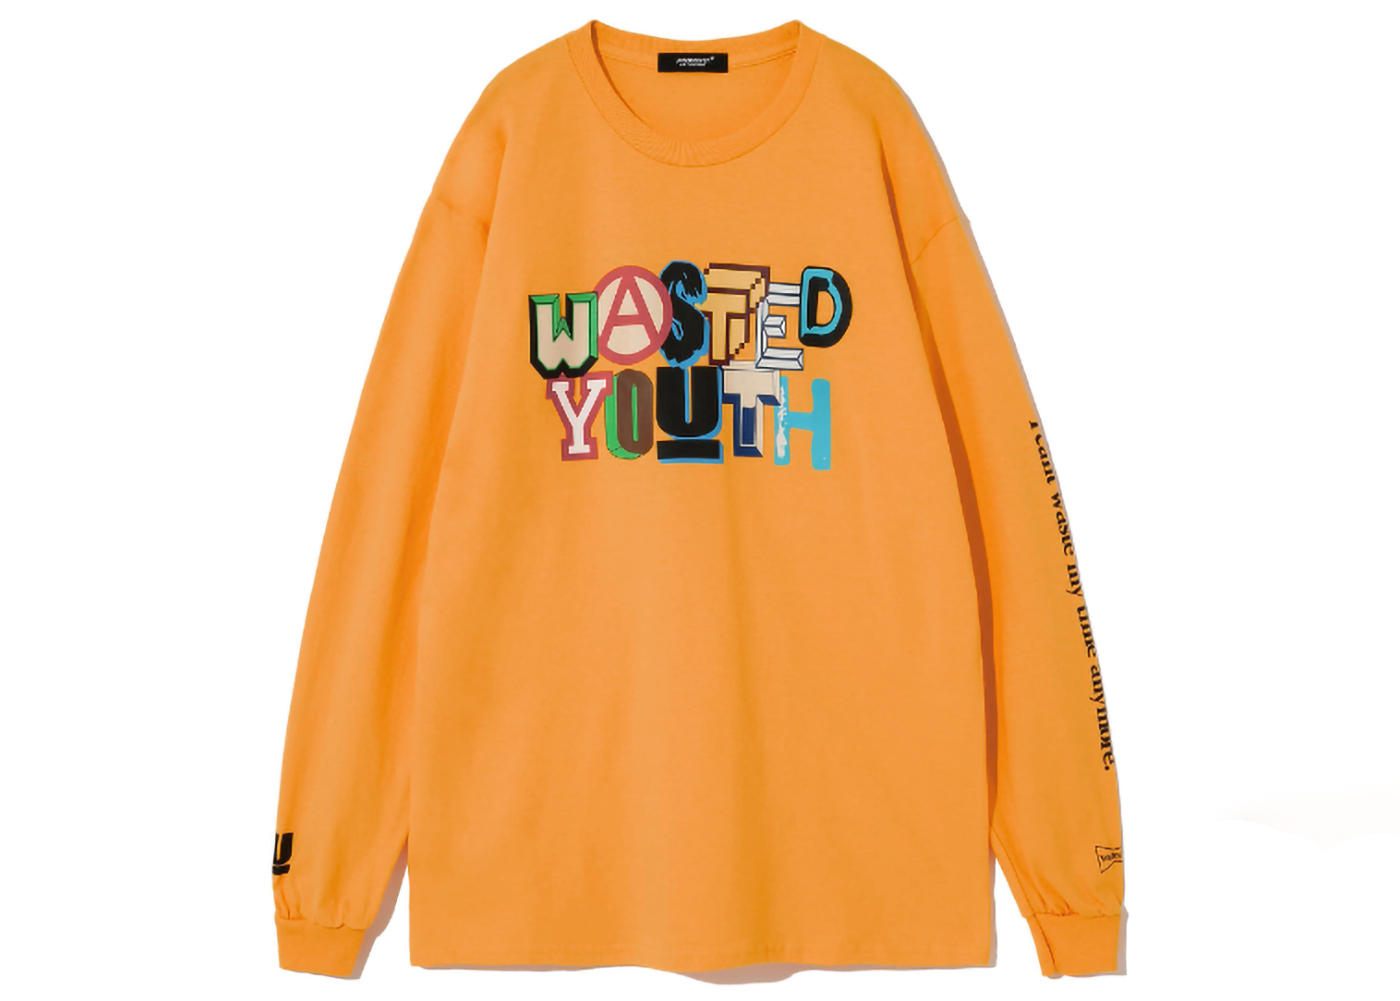 Undercover x Verdy Wasted Youth L/S T-Shirt Yellow - SS23 Men's - US